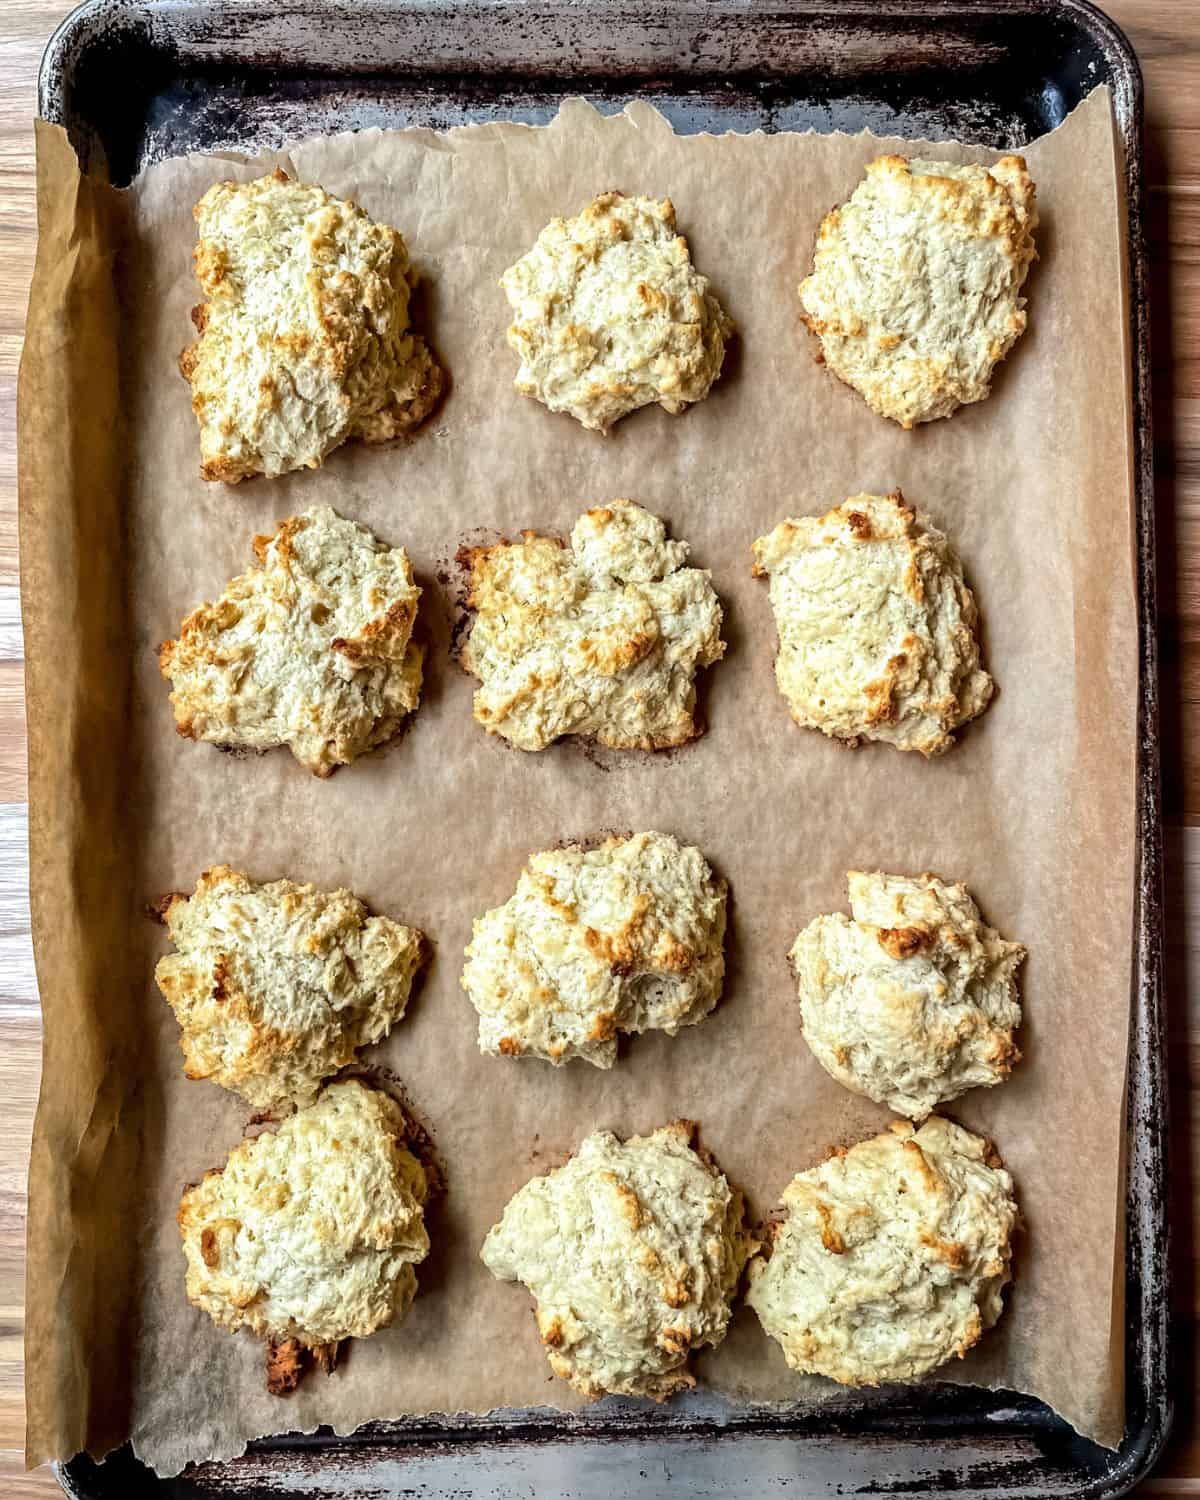 Baked 3 ingredient drop biscuits on a parchment lined baking sheet.